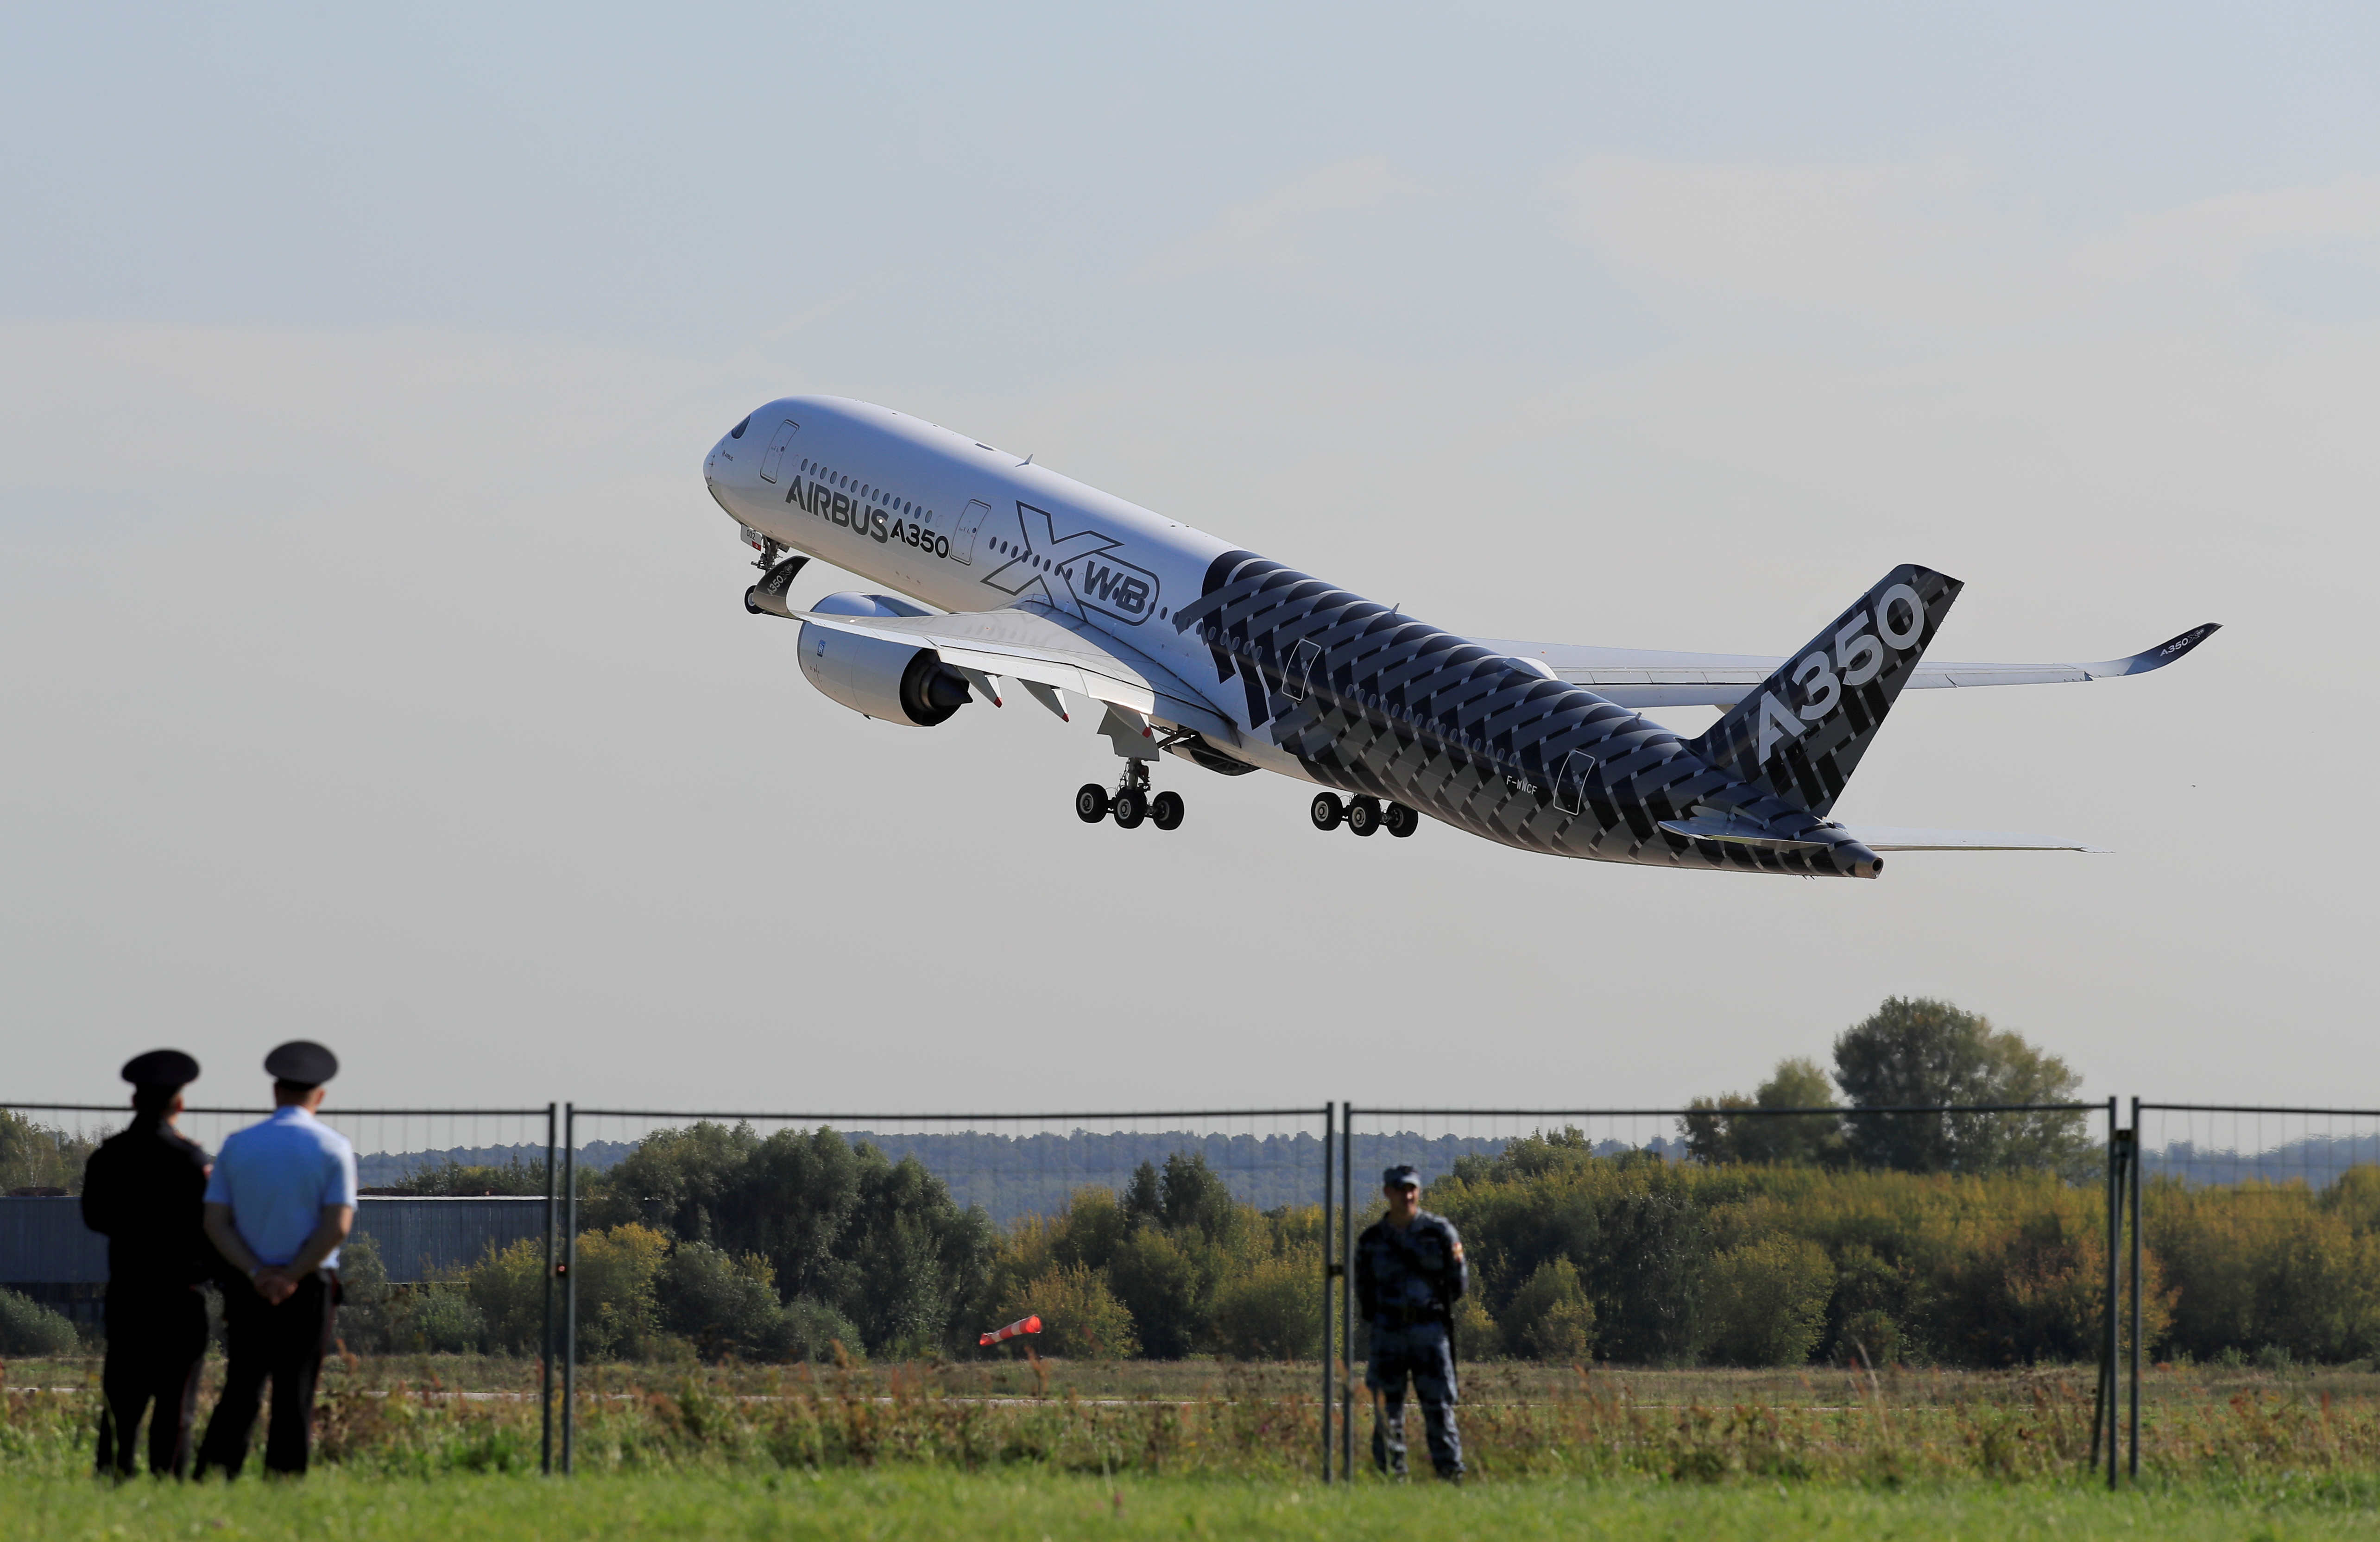 An Airbus A350 jet airliner takes off during a demonstration flight at the MAKS-2019 air show in Zhukovsky outside Moscow, Russia August 29, 2019. REUTERS/Tatyana Makeyeva/File Photo